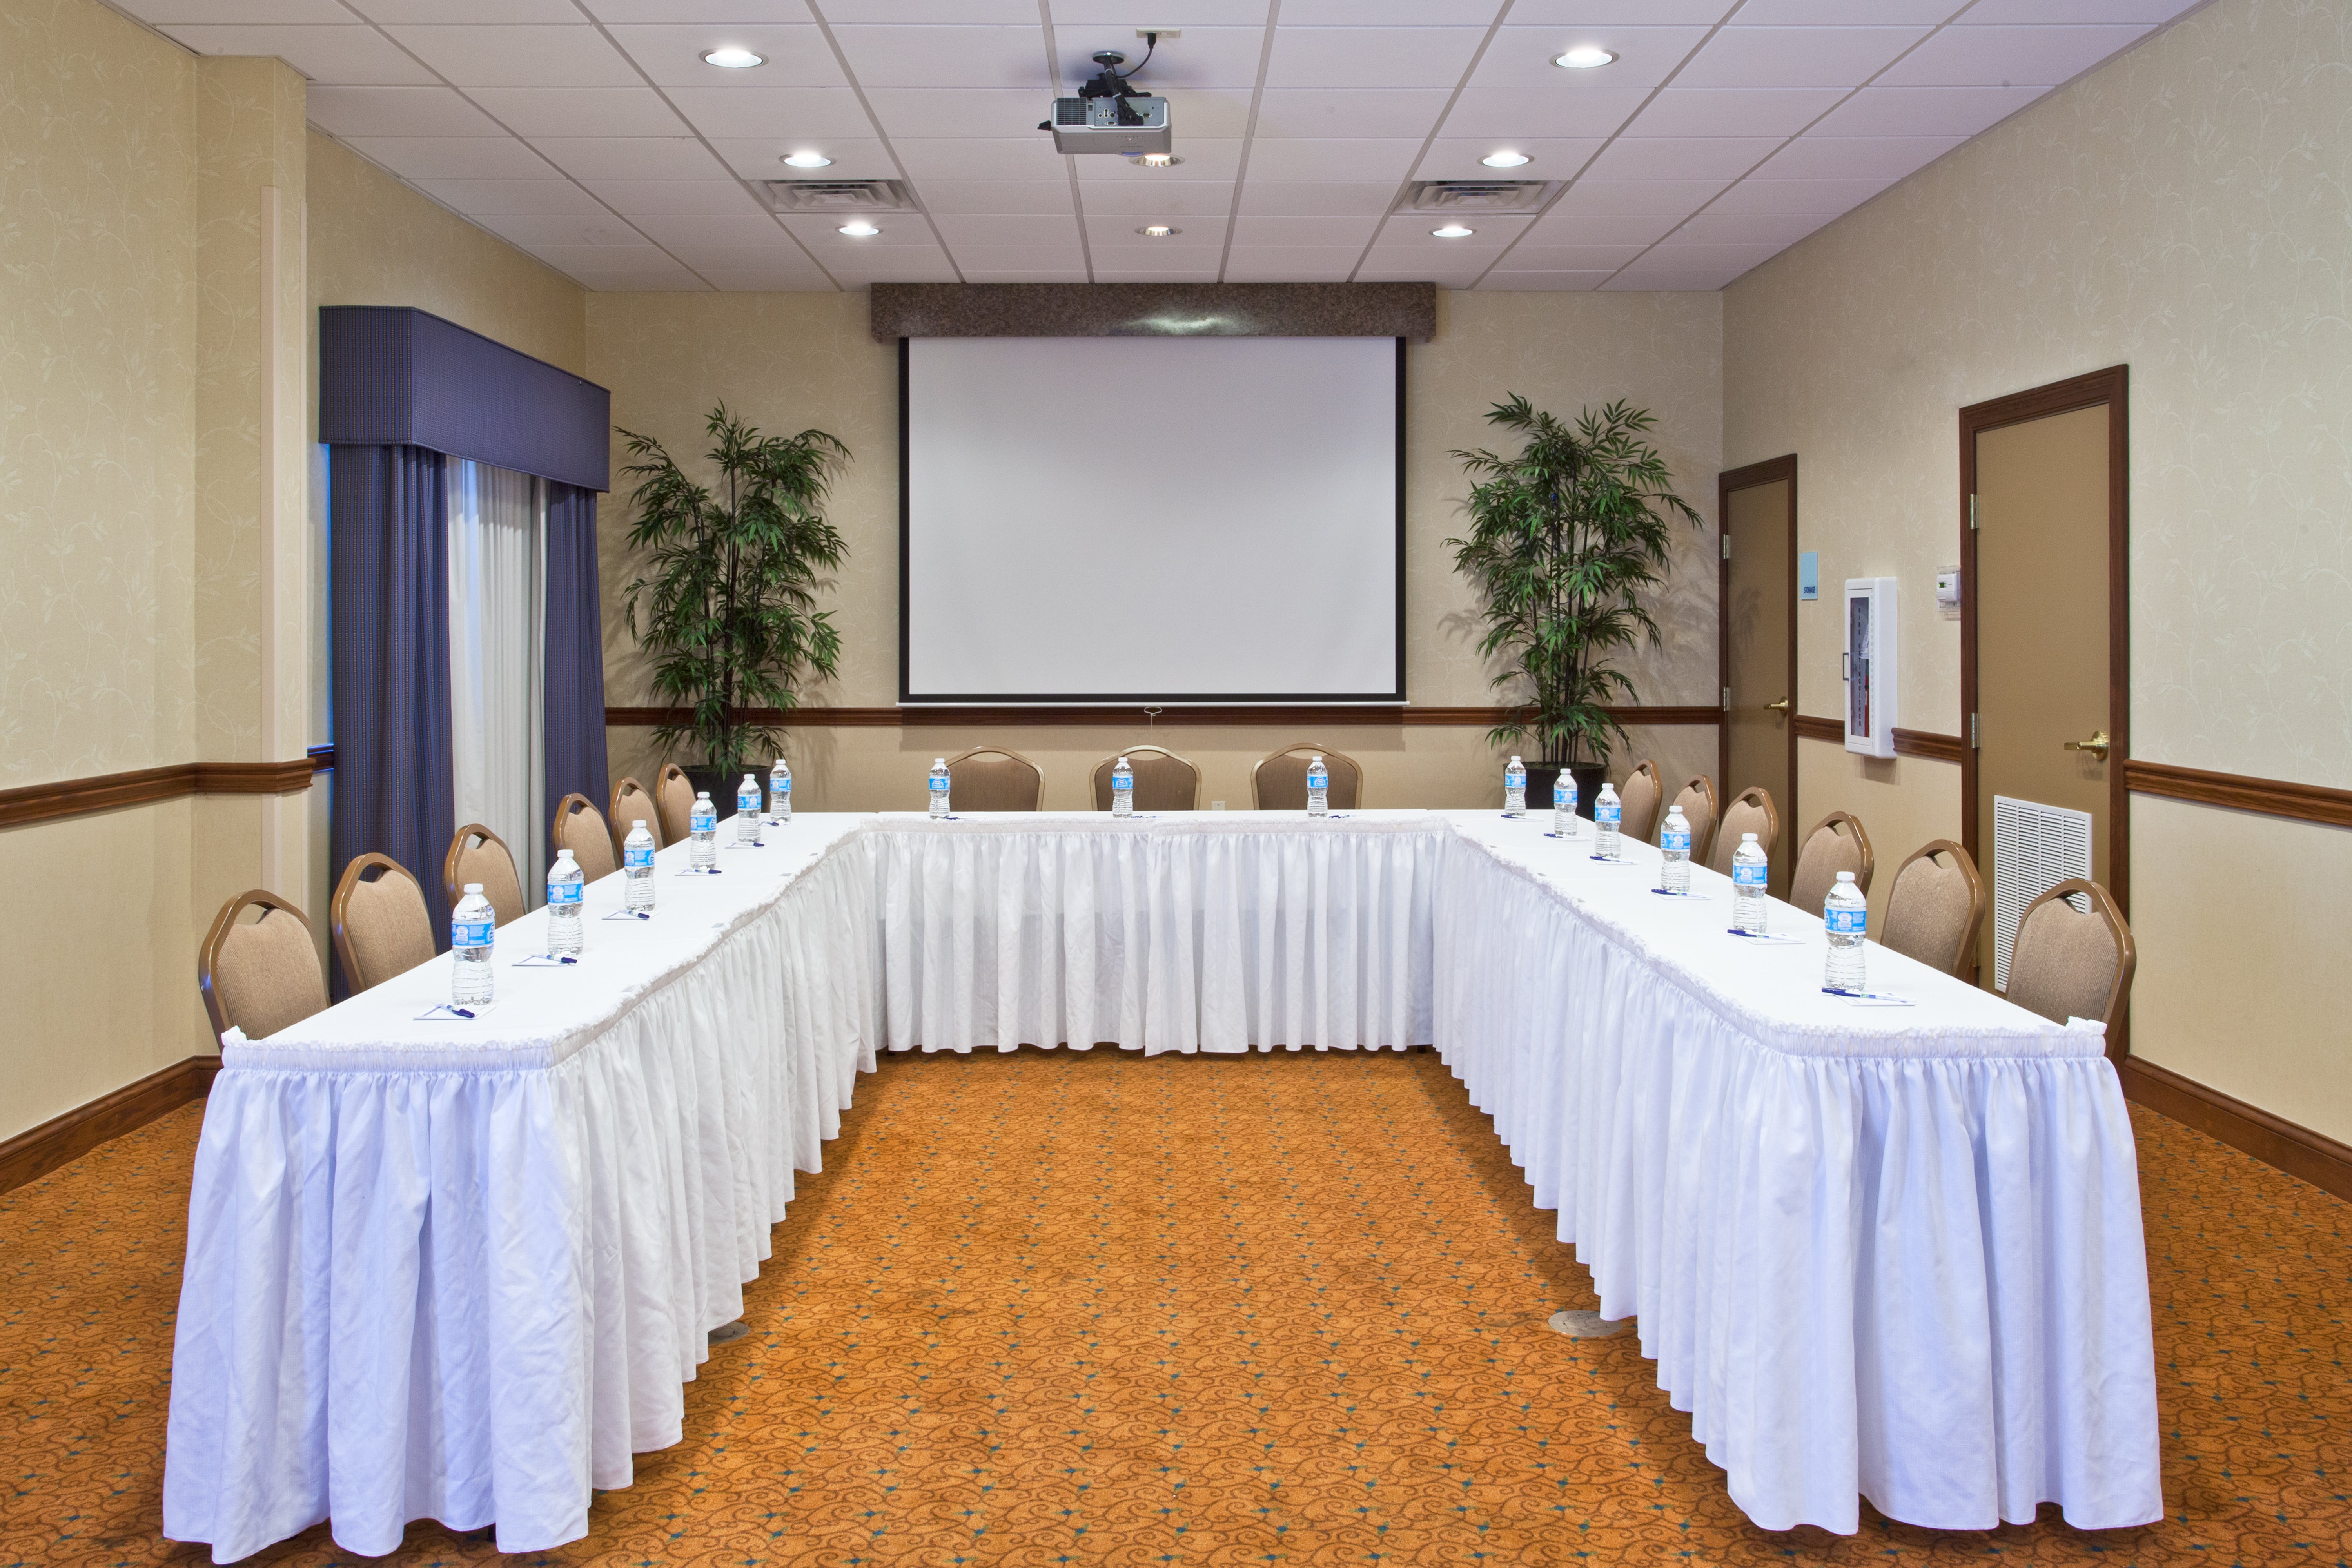 Our central location near Exit 33 off I-4 is perfect for Meetings!